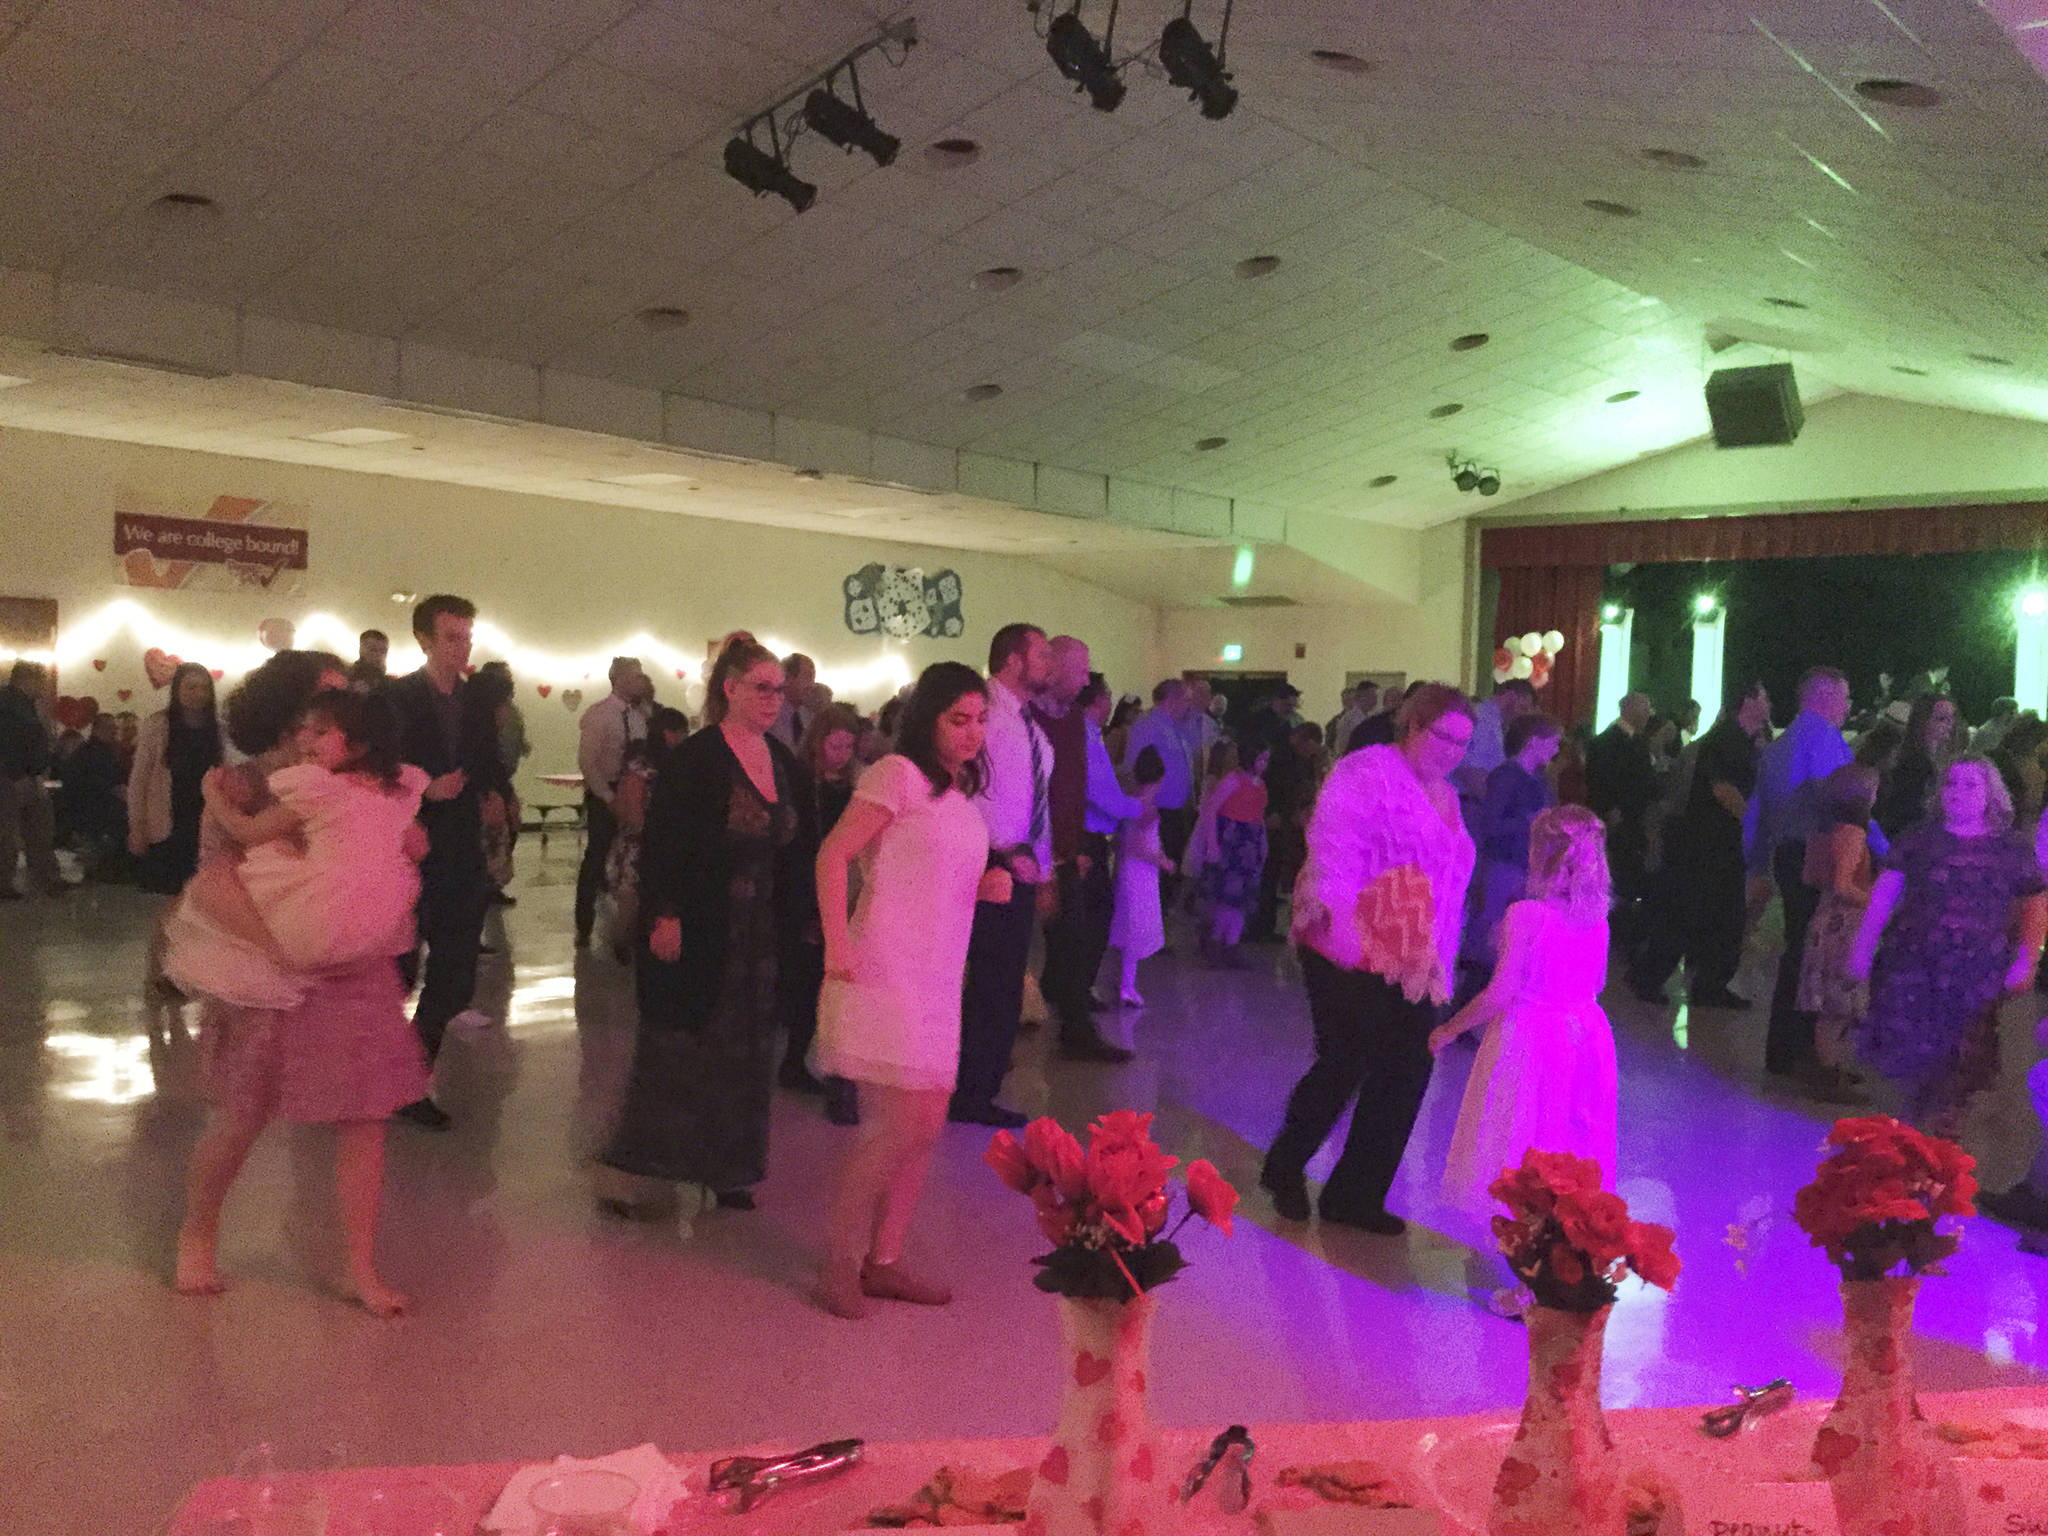 Fathers, daughters bond at special Valentine’s dance